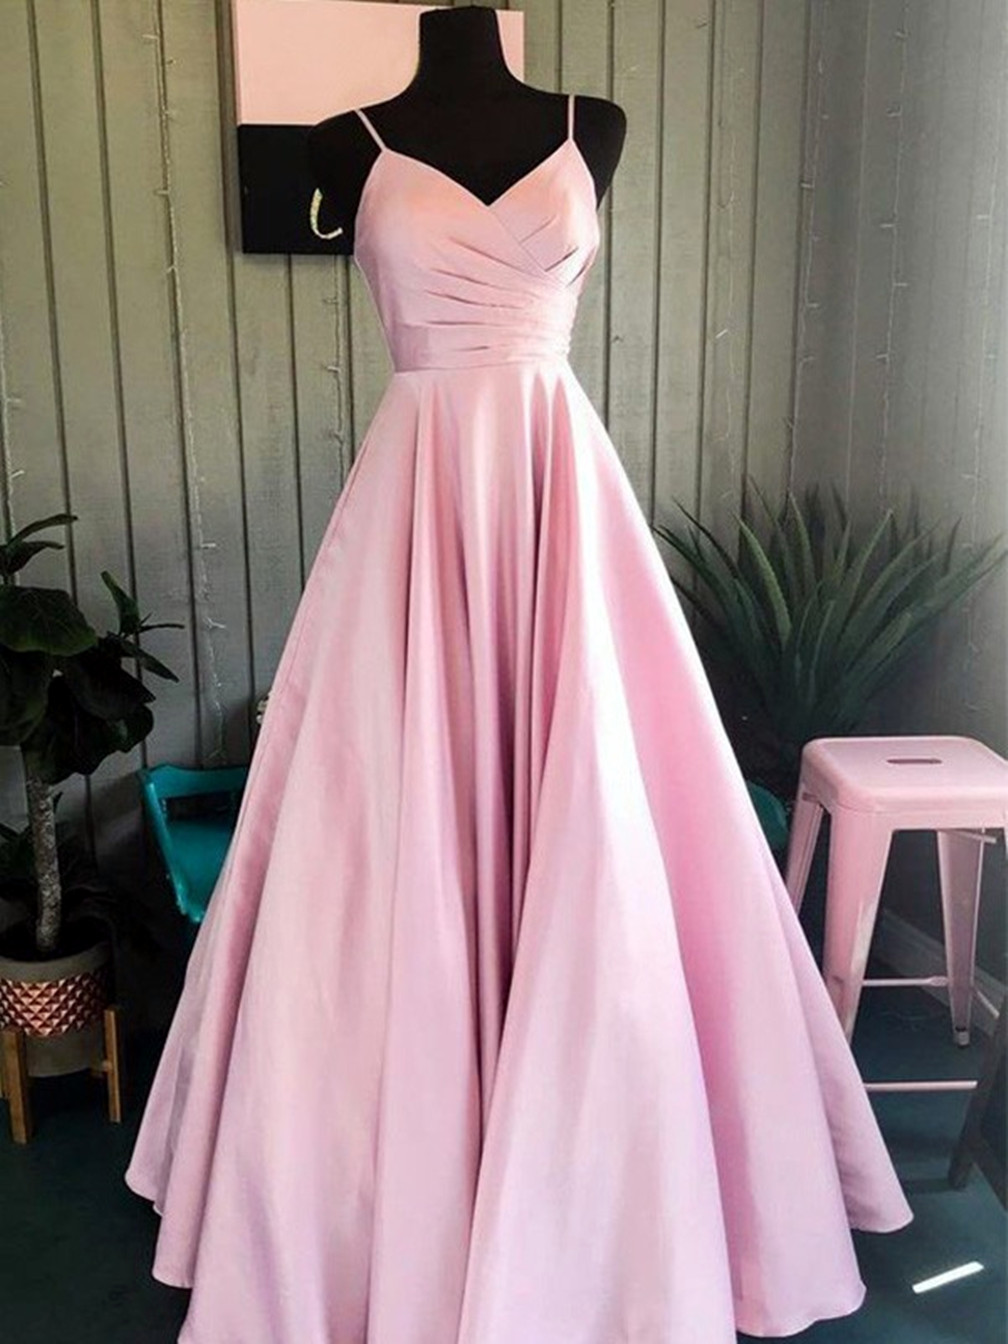 Women A-line/princess Satin Prom Dresses Long Spaghetti Straps Evening Party Gowns Sleeveless Formal Dress Yp085